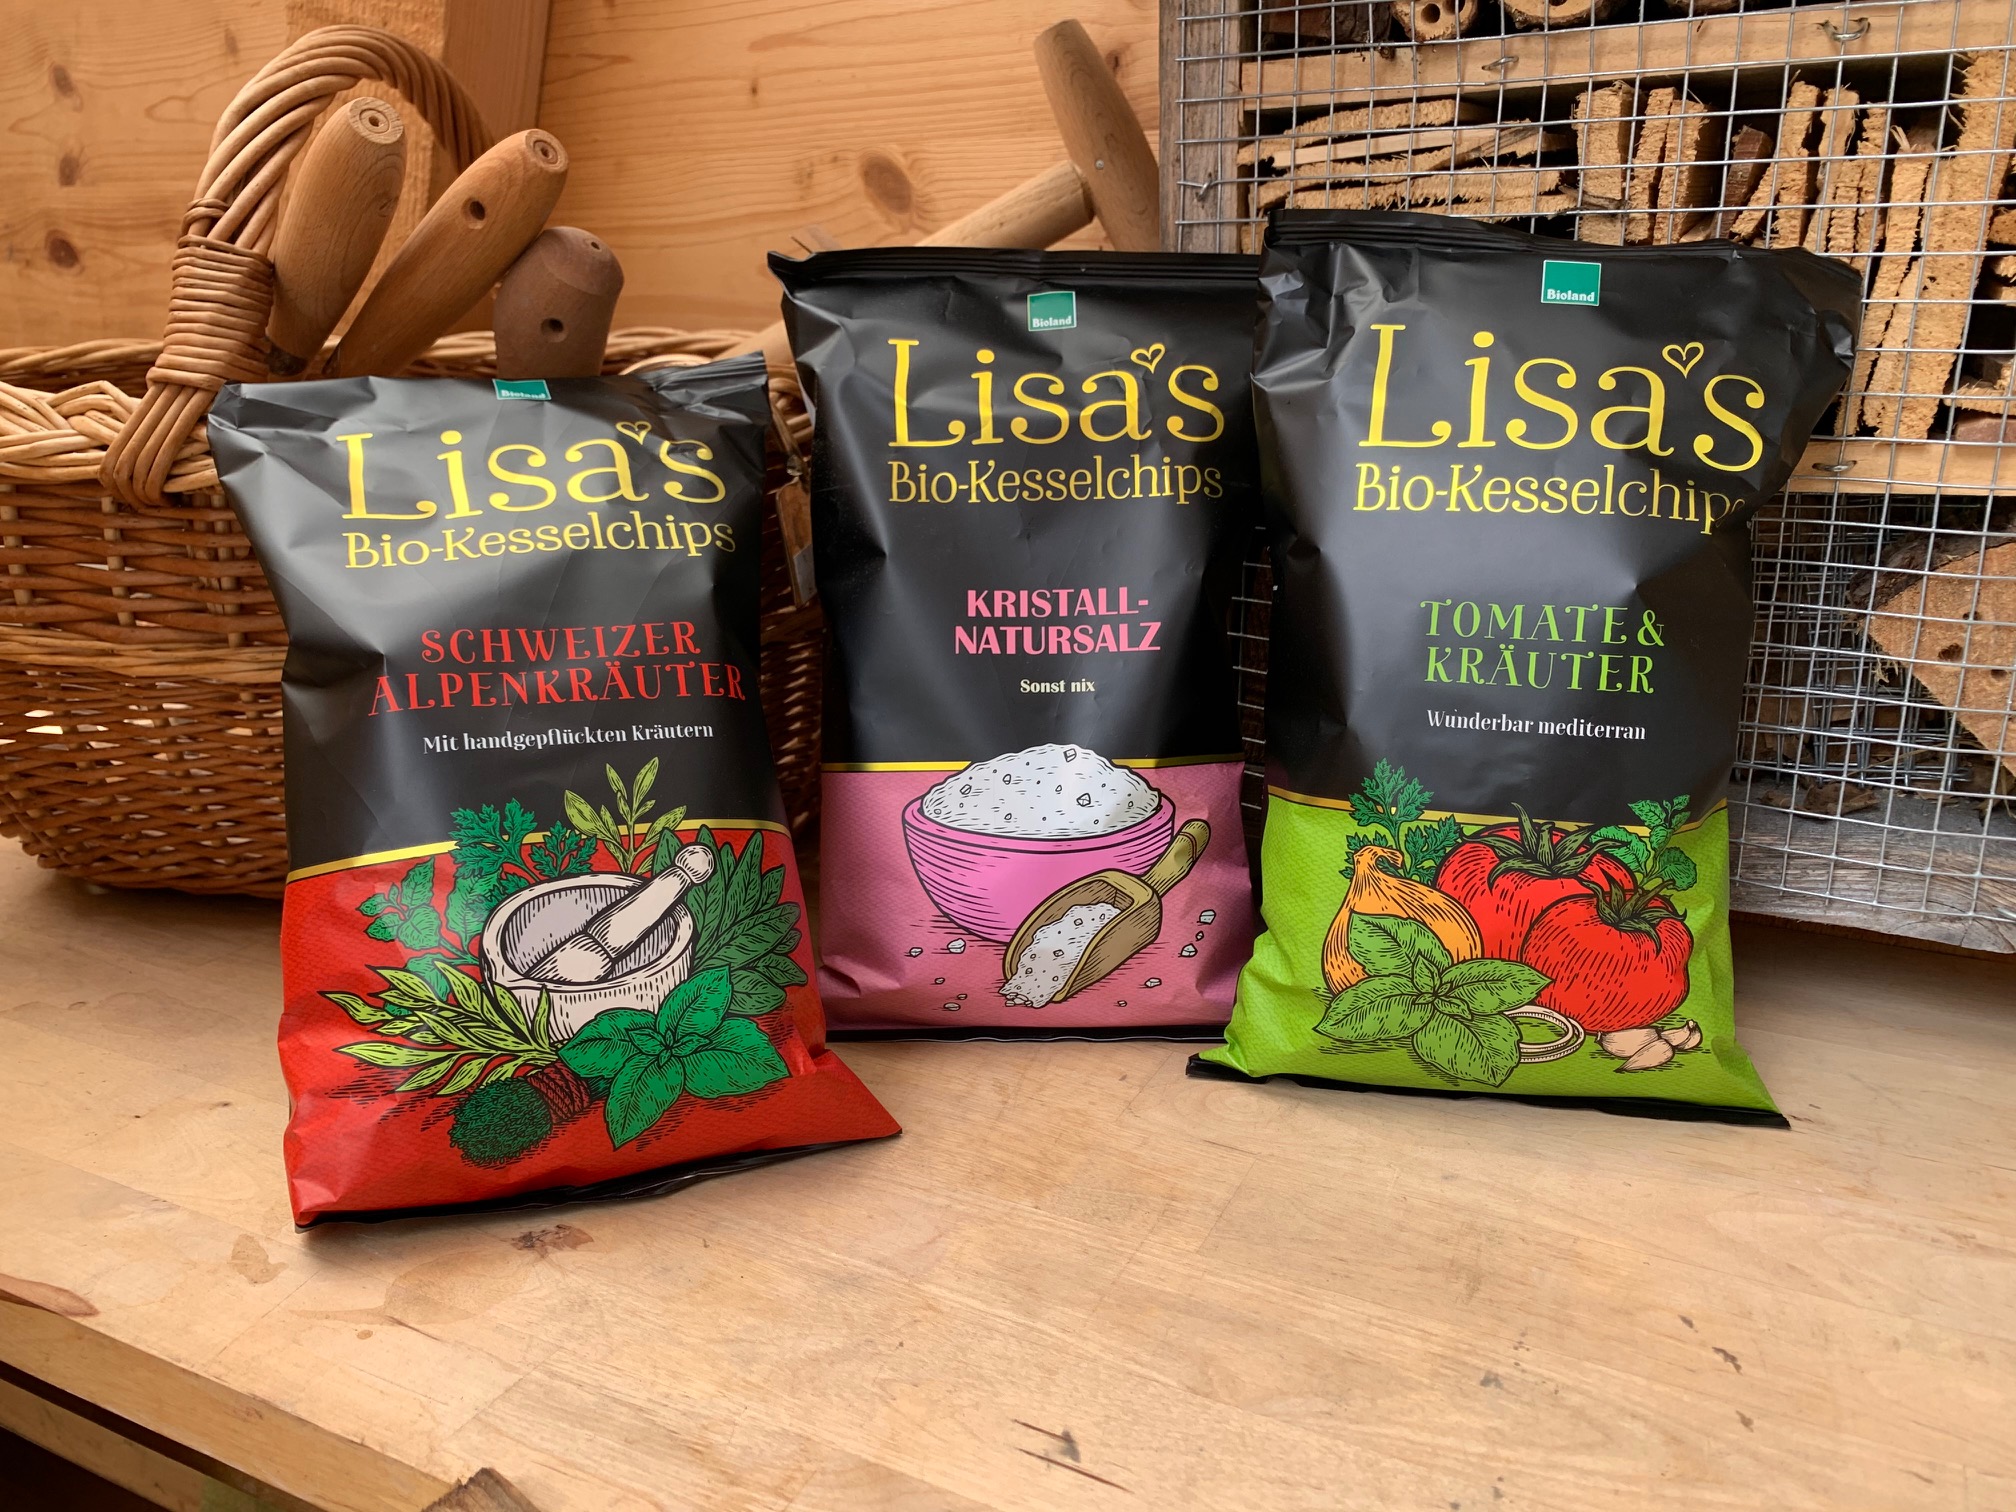 May offer – Lisa's organic chips